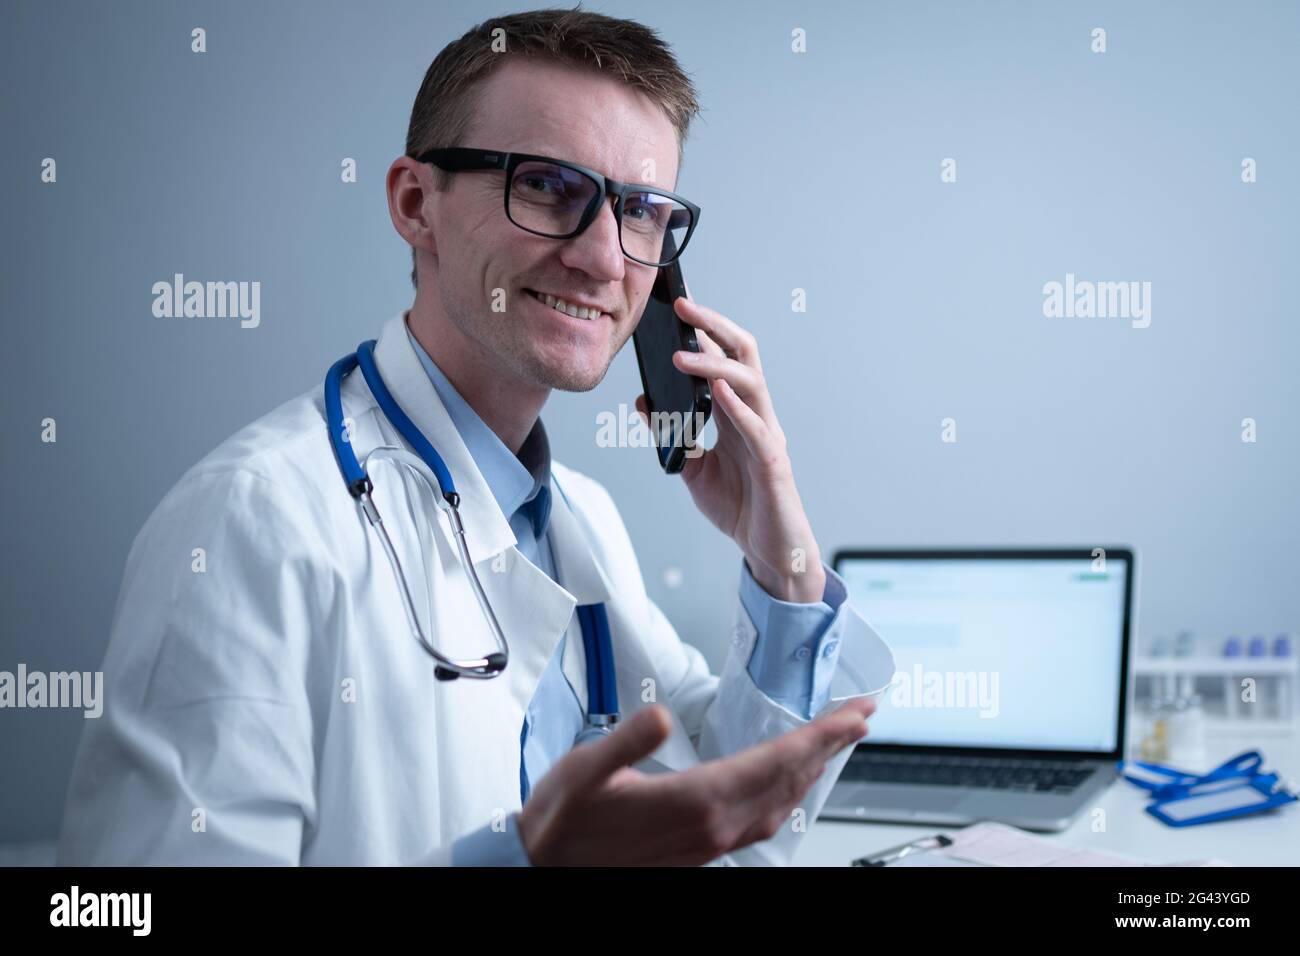 European doctor in white medical coat and glasses consults patient on cell phone in clinic office, sitting at table with laptop. Stock Photo